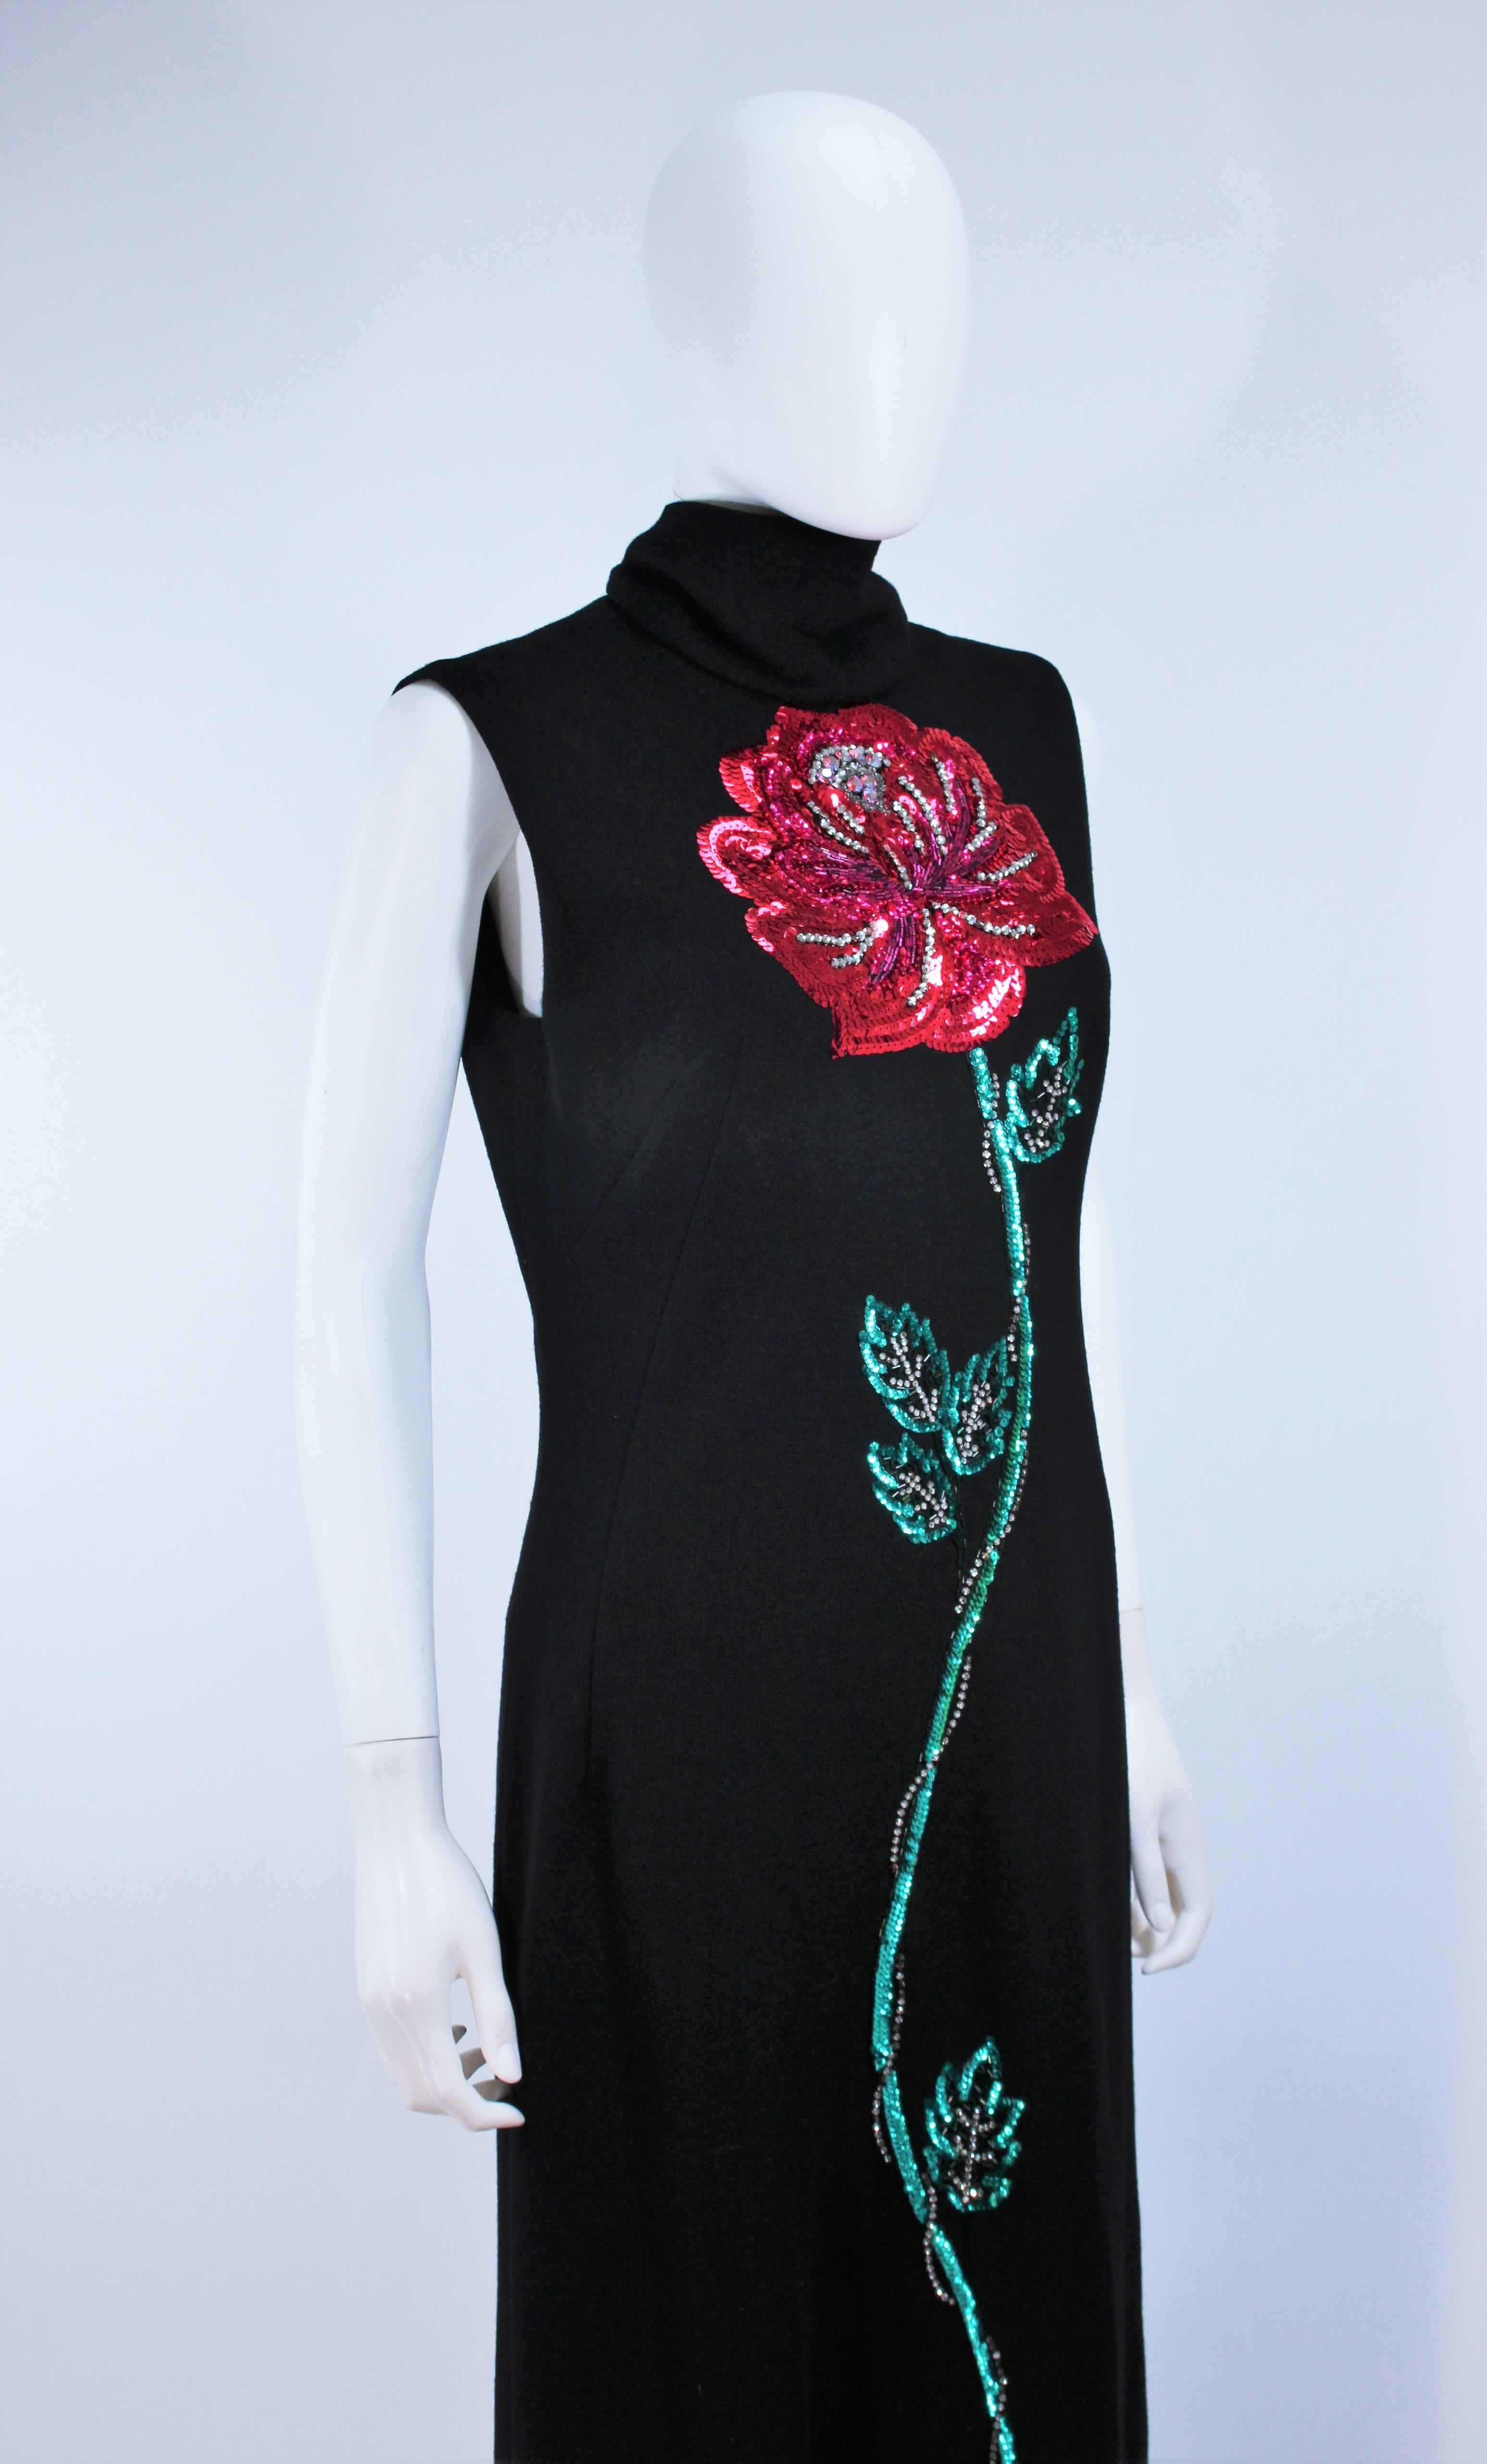 Women's MR. BLACKWELL Wool Turtleneck Gown with Sequin Rose Applique Size 10